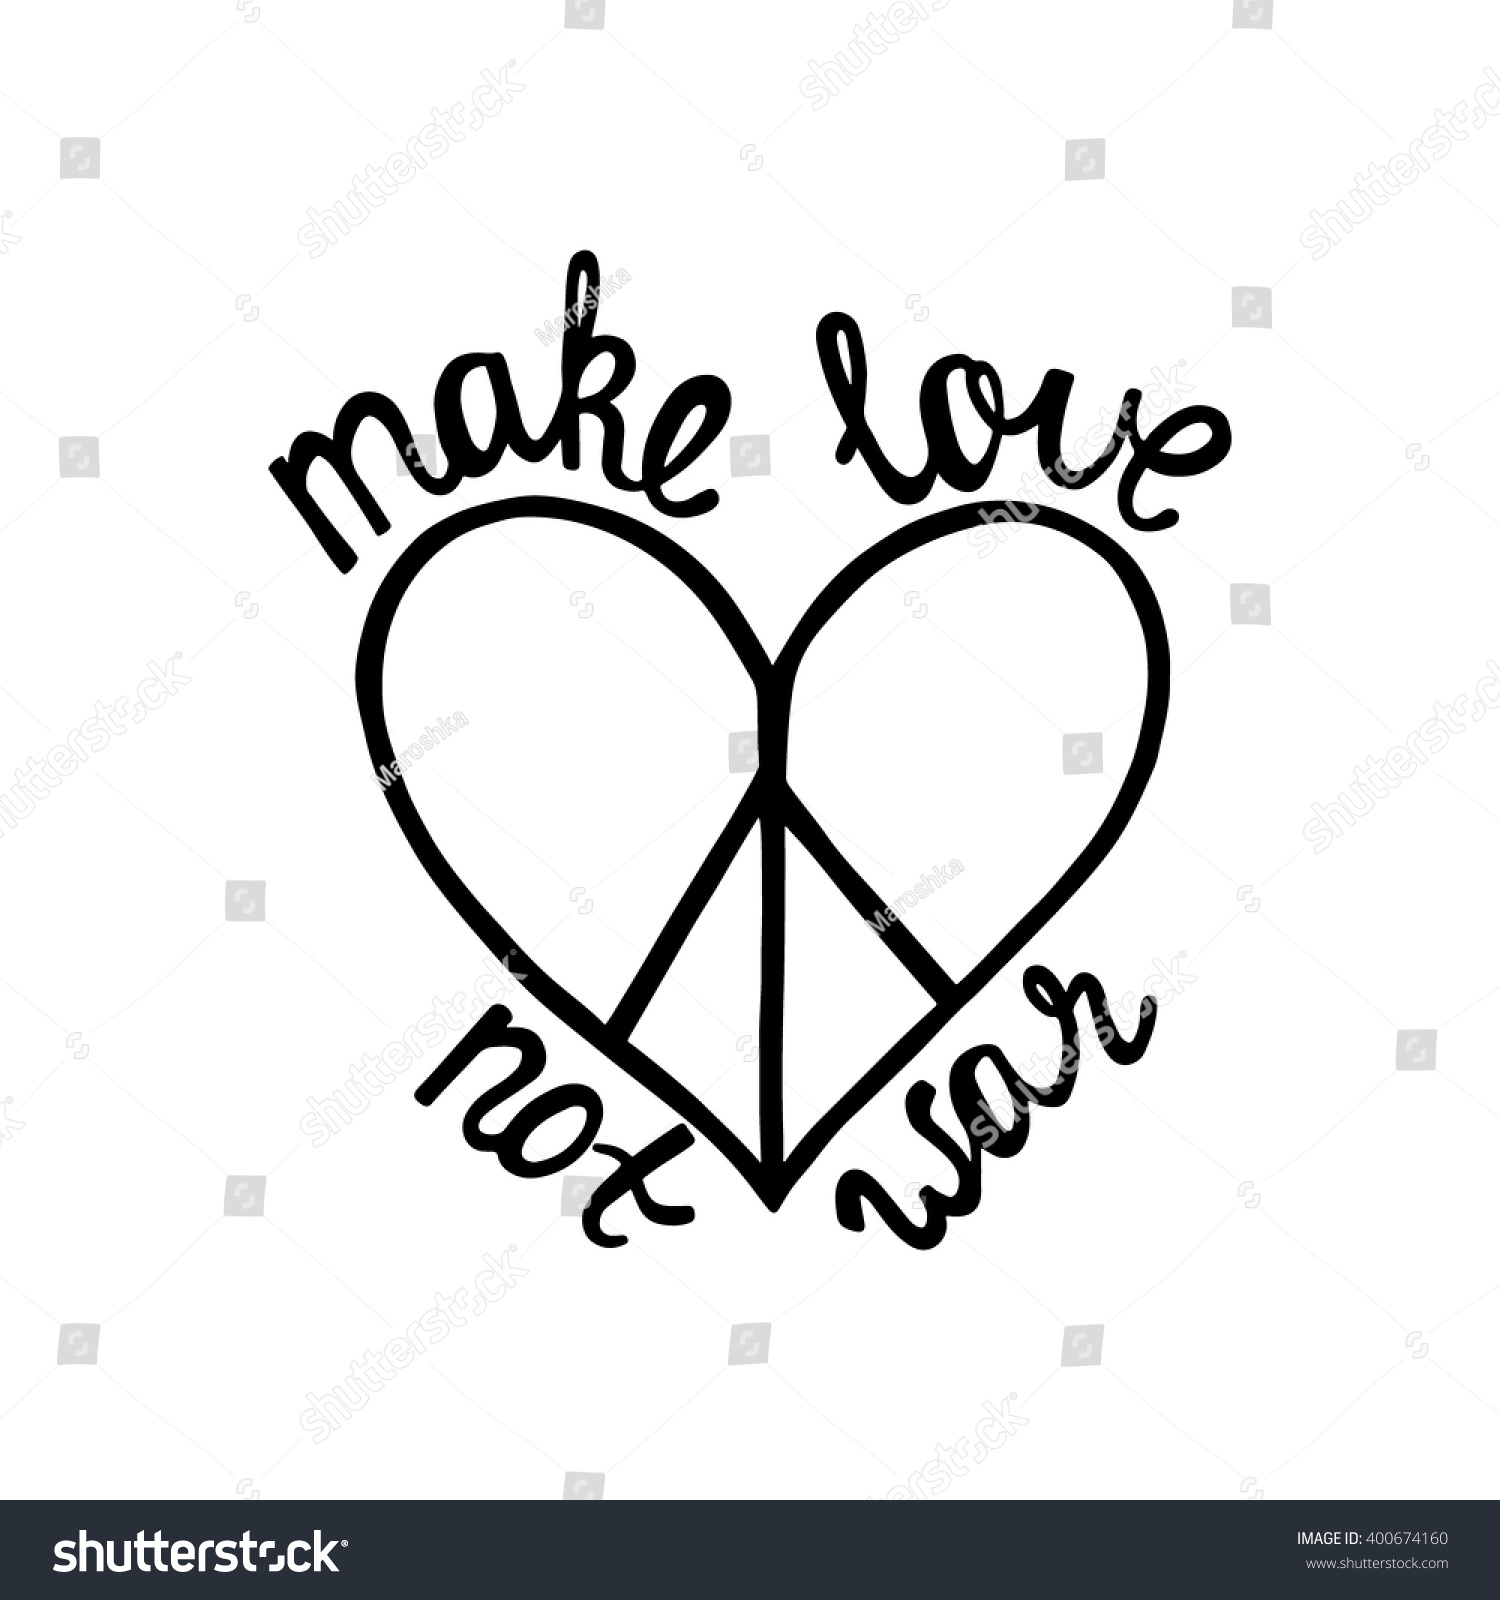 Make love not war Inspirational quote about peace Modern calligraphy phrase with hand